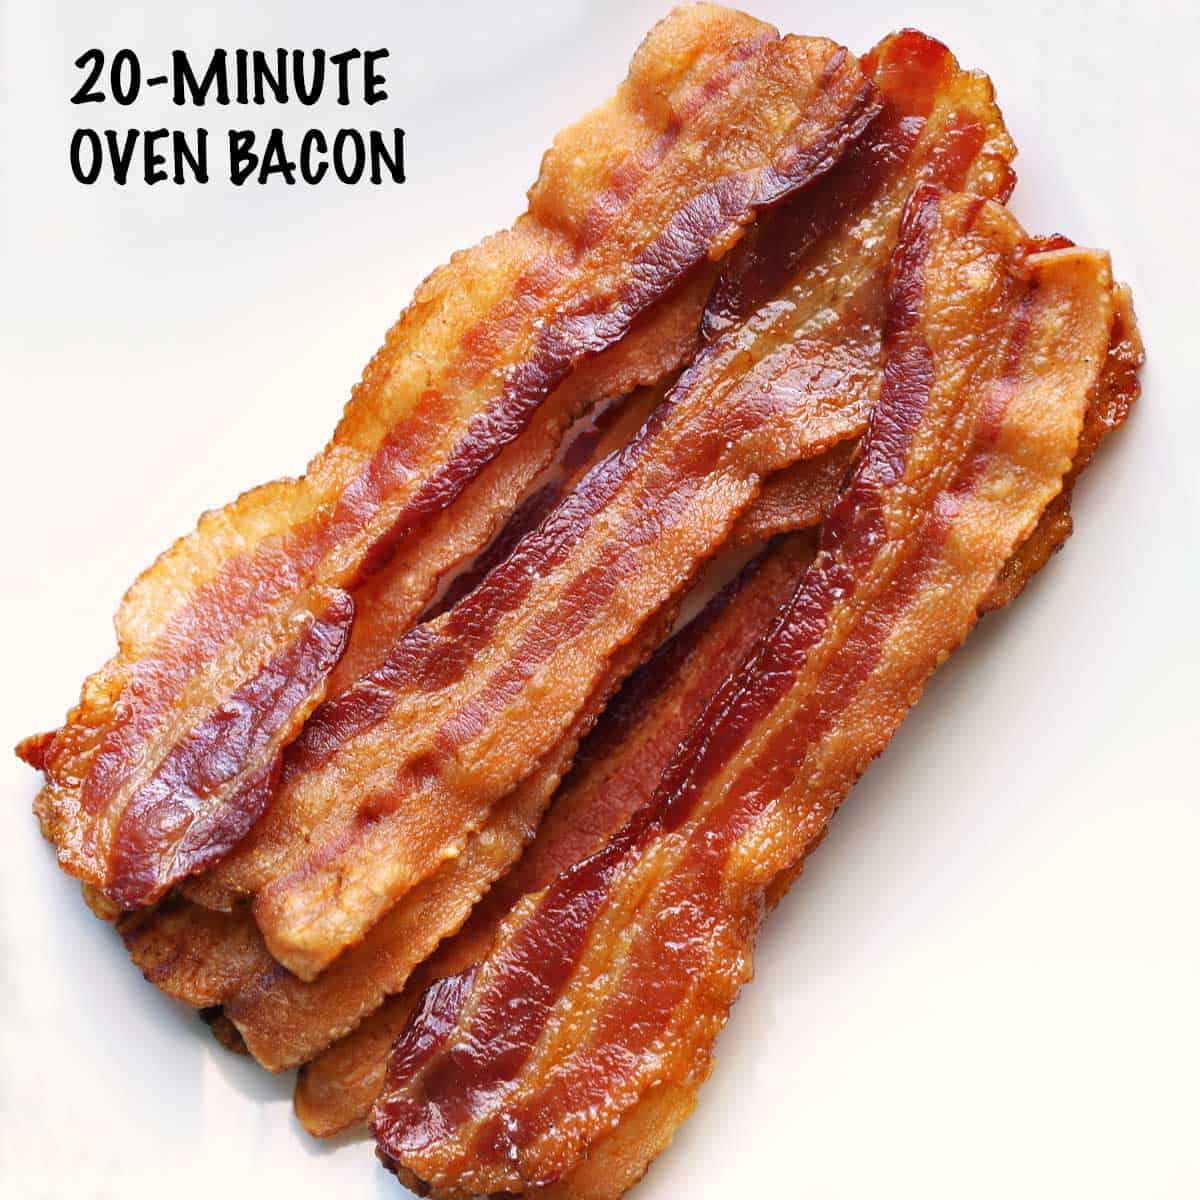 Crispy bacon that was baked for 20 minutes.